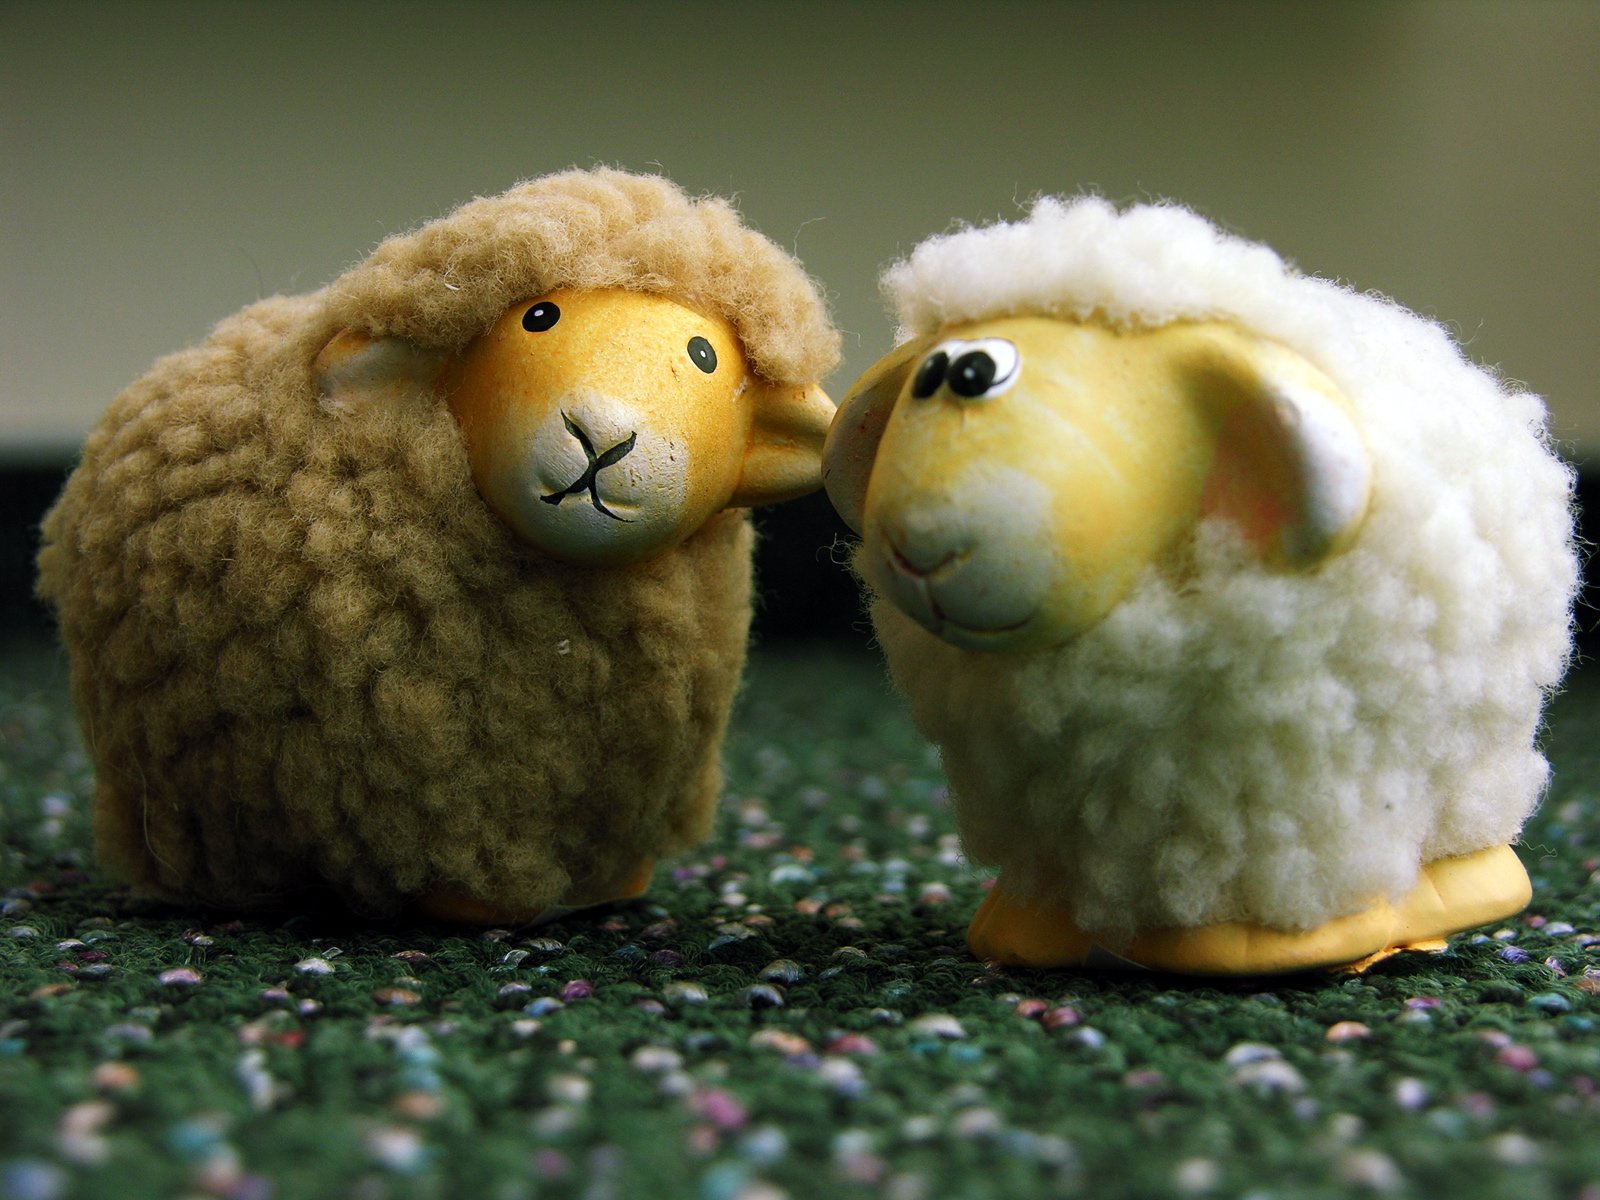 two toy sheep standing next to each other